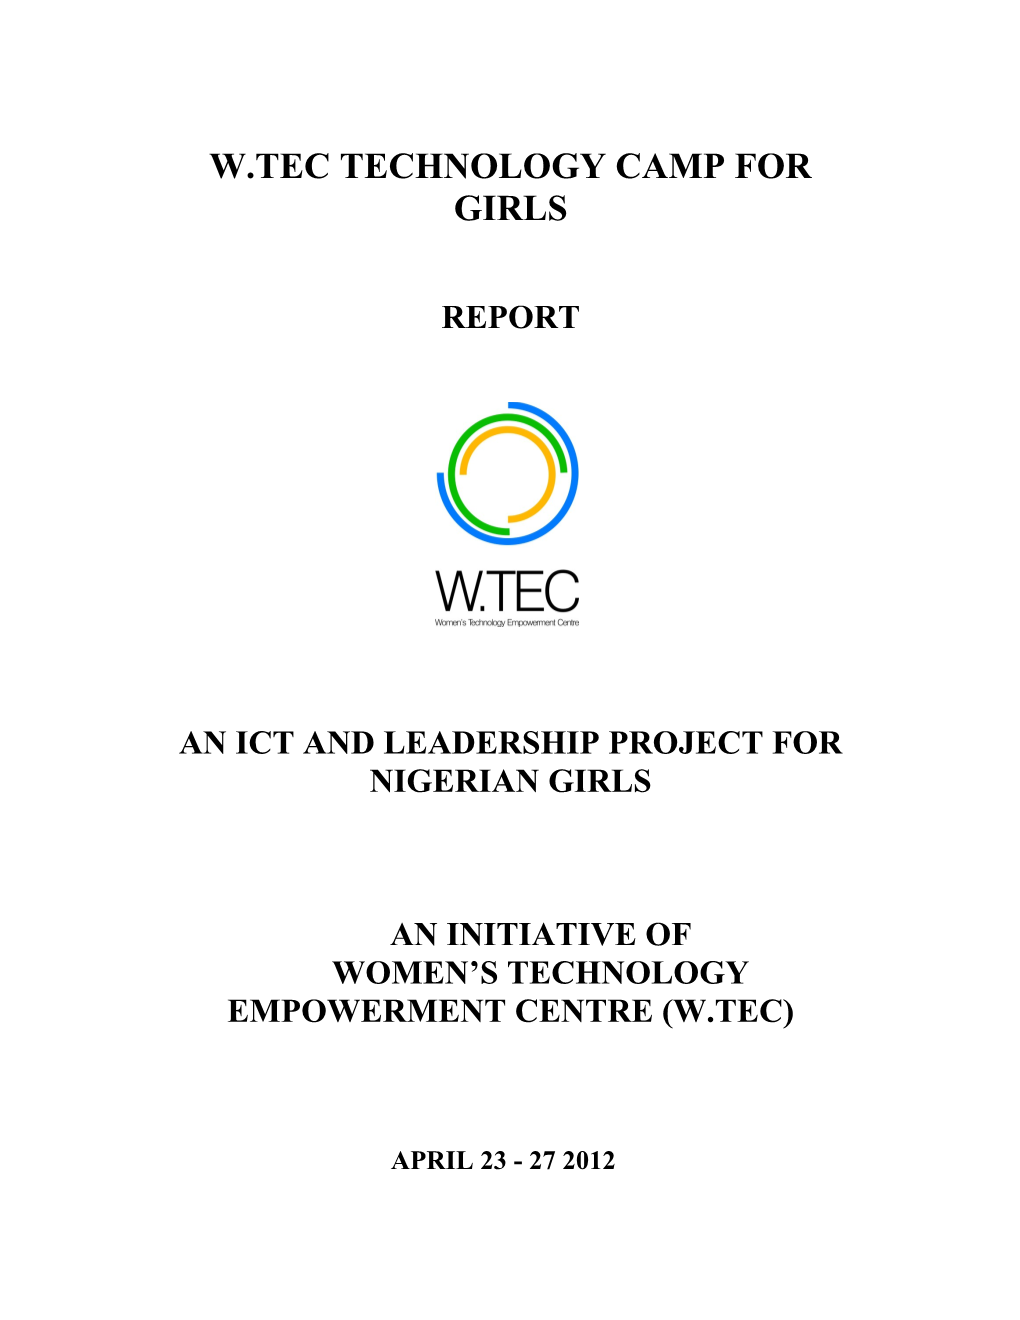 An Ict and Leadership Project for Nigerian Girls